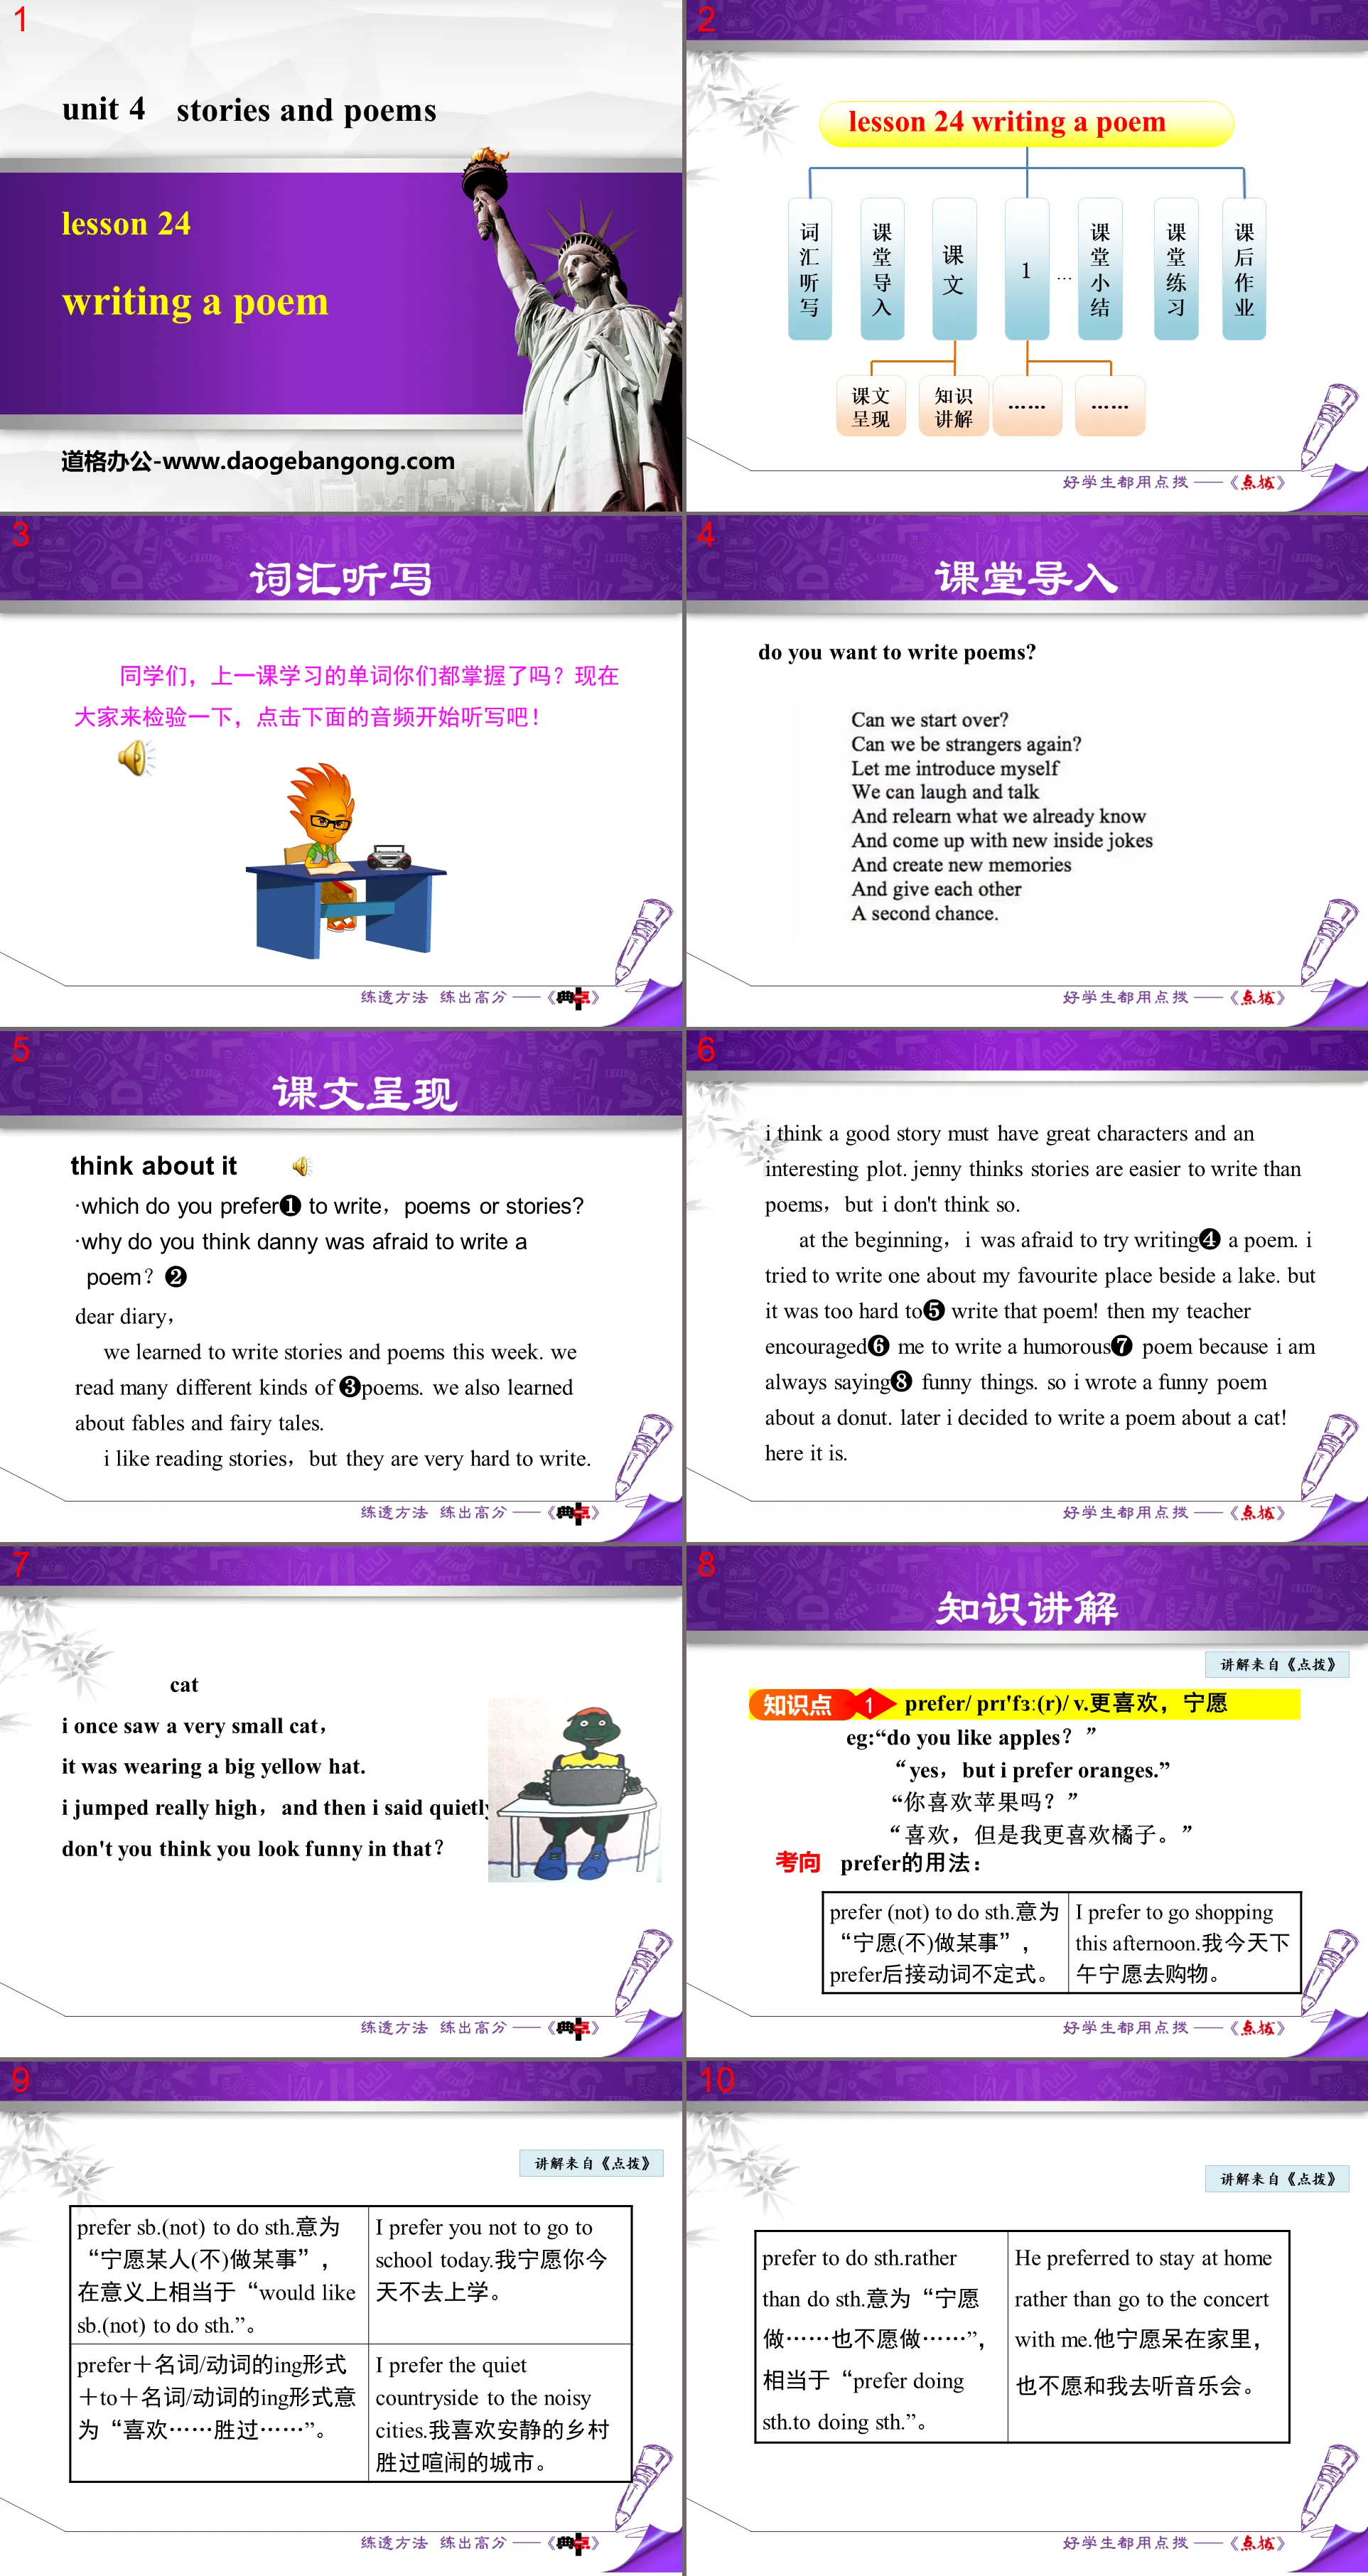 "Writing a Poem" Stories and Poems PPT courseware download